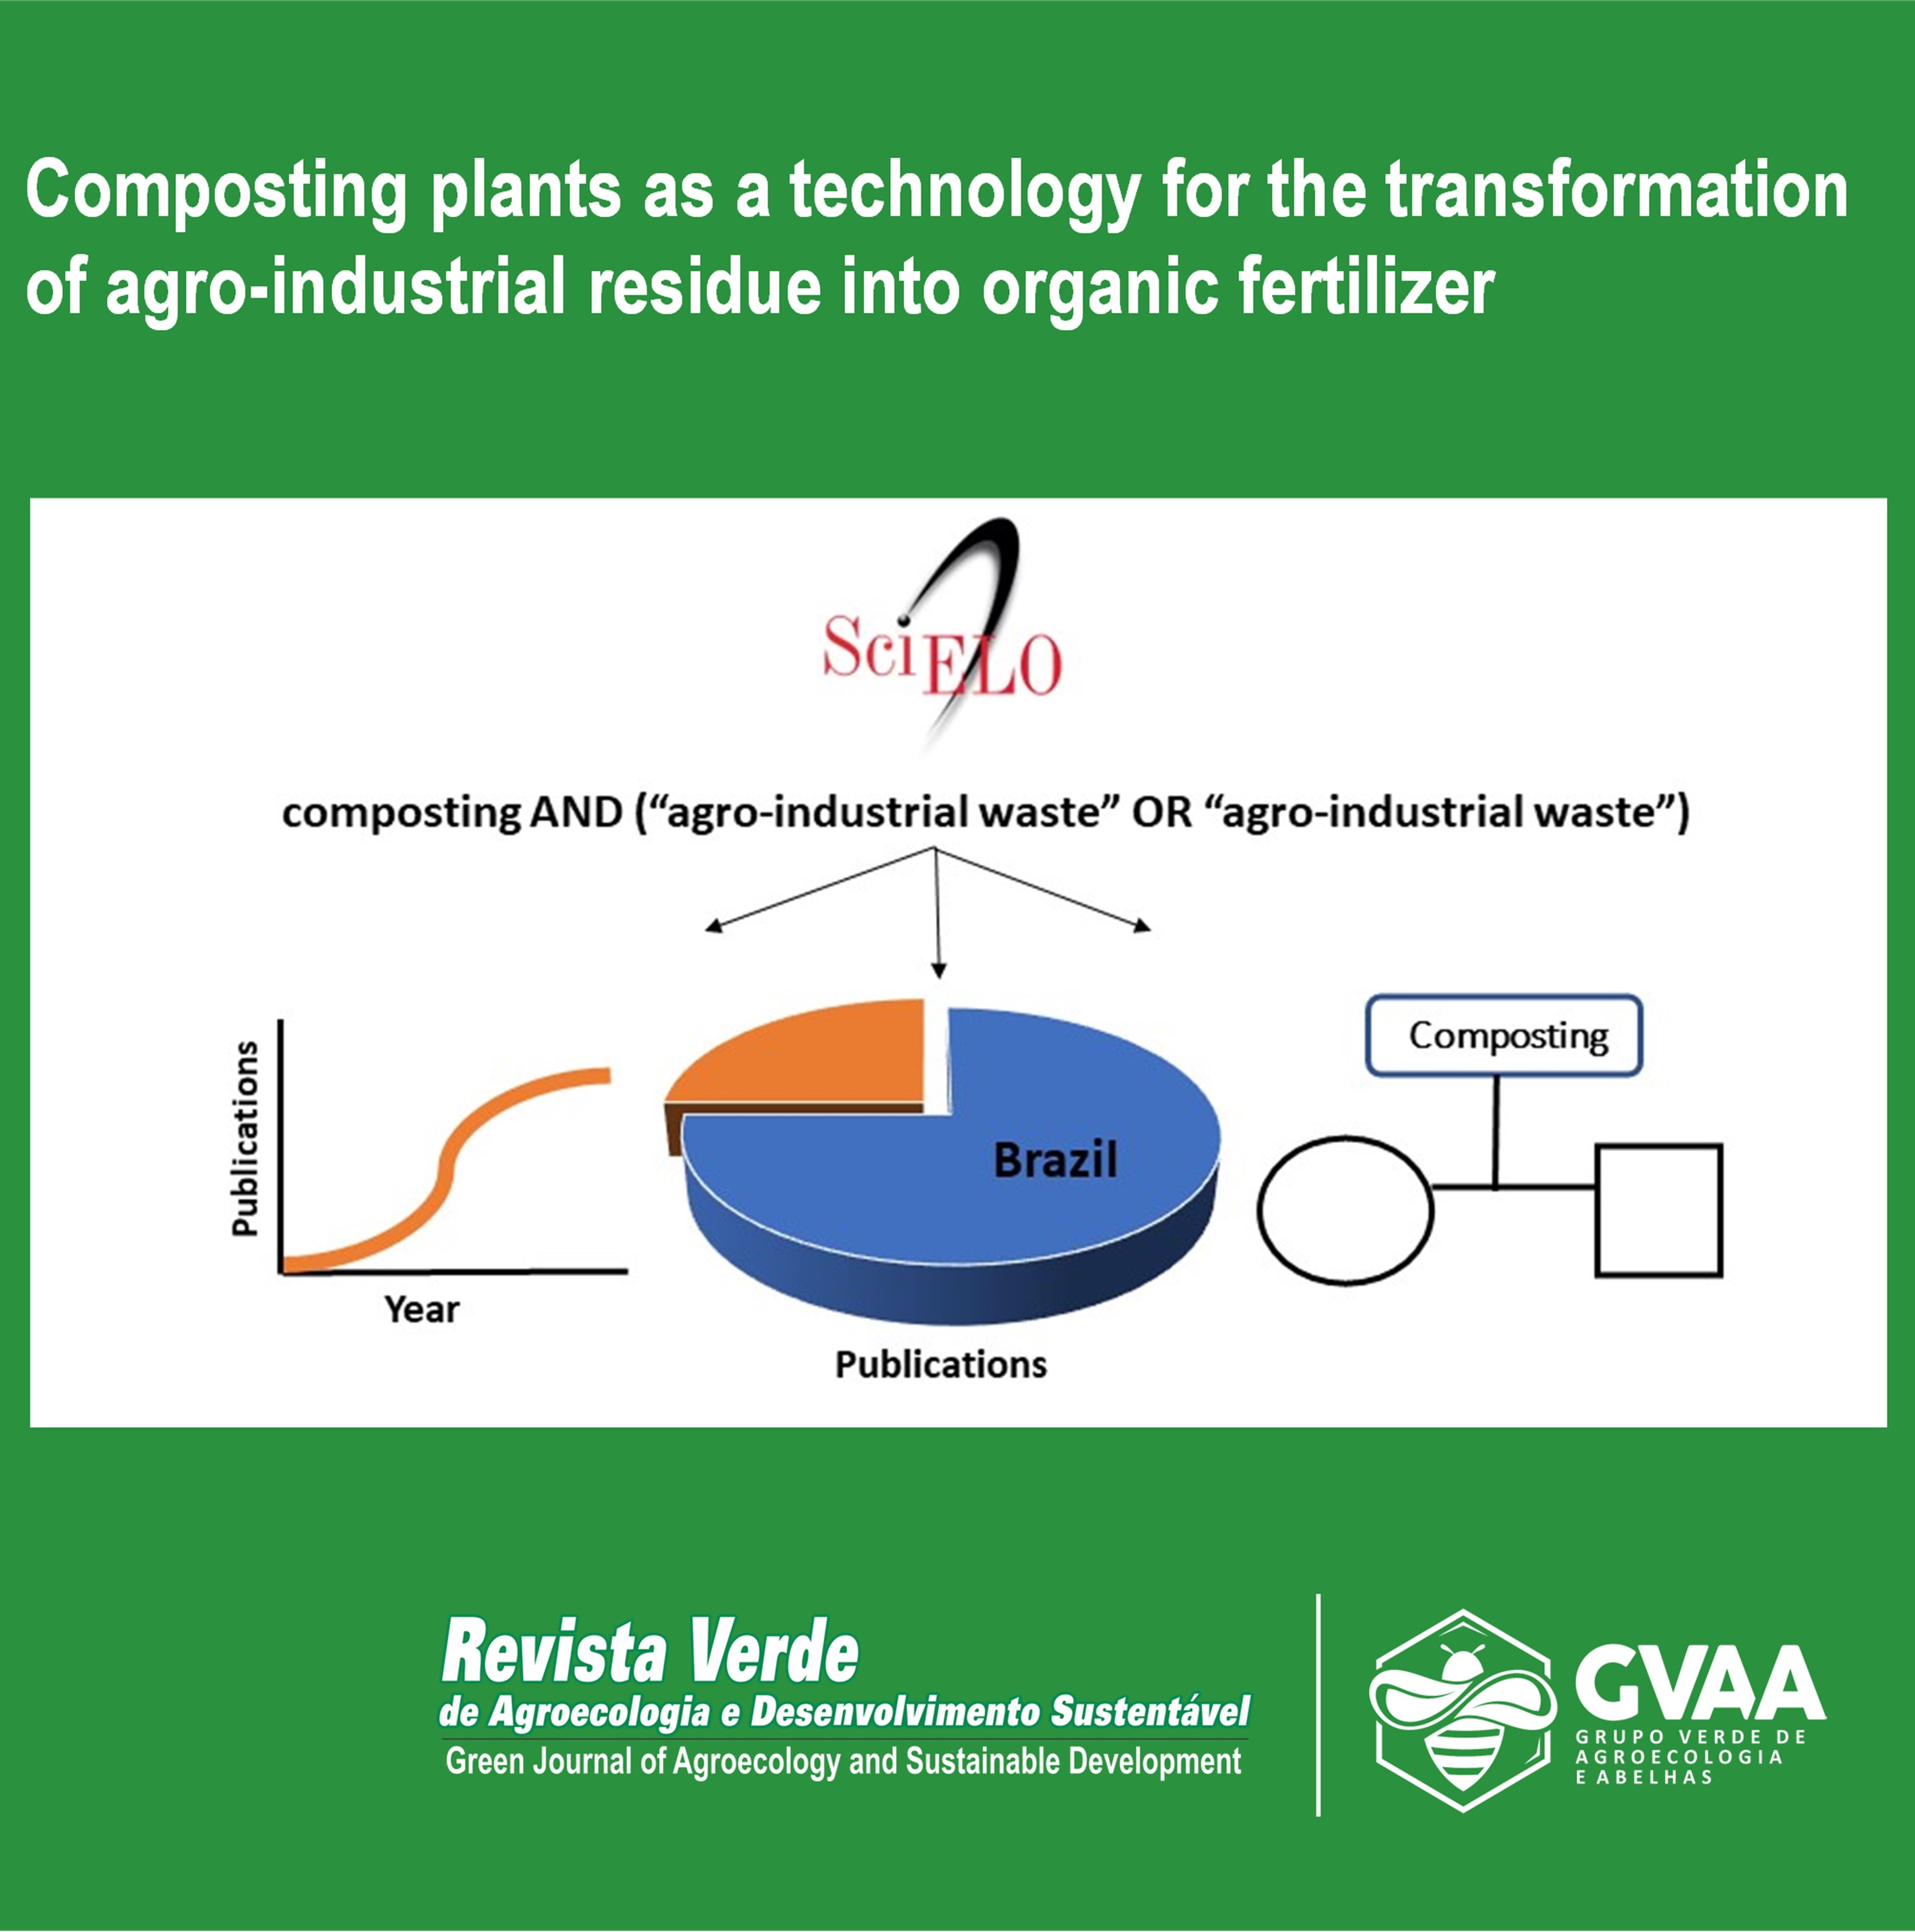 Composting plants as a technology for the transformation of agro-industrial residue into organic fertilizer